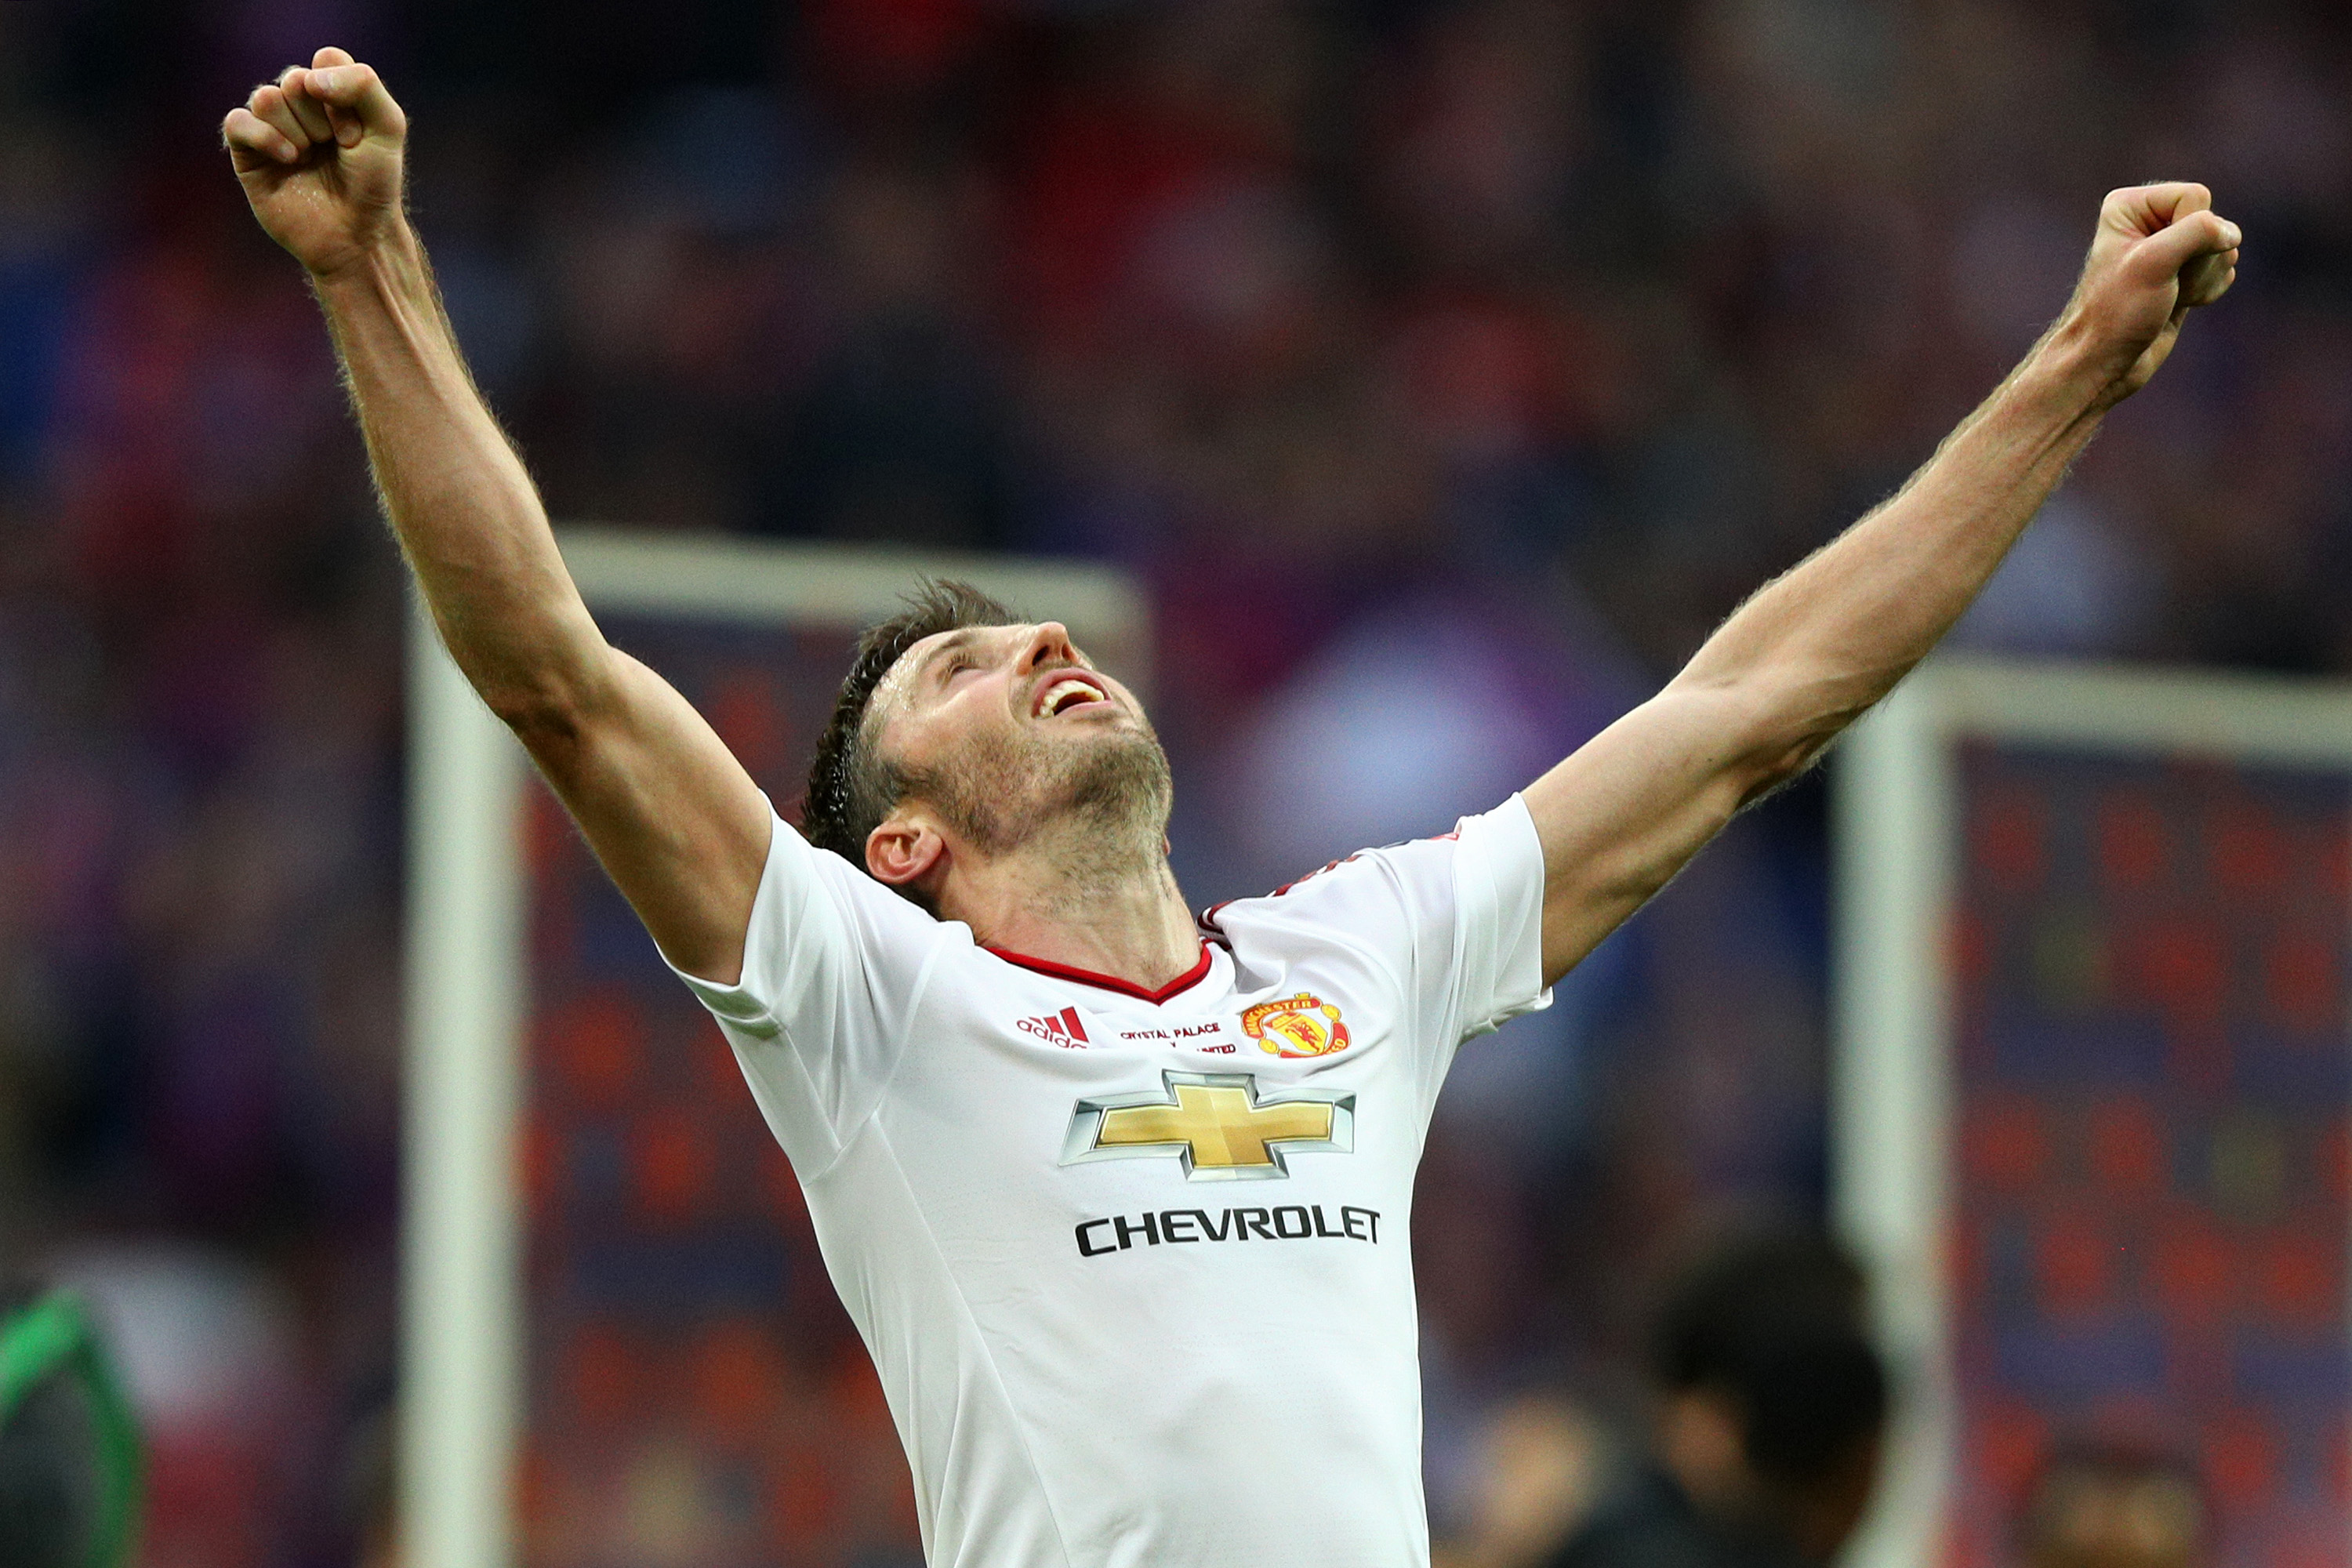 LONDON, ENGLAND - MAY 21:  Michael Carrick of Manchester United celebrates victory after The Emirates FA Cup Final match between Manchester United and Crystal Palace at Wembley Stadium on May 21, 2016 in London, England.  (Photo by Paul Gilham/Getty Images)